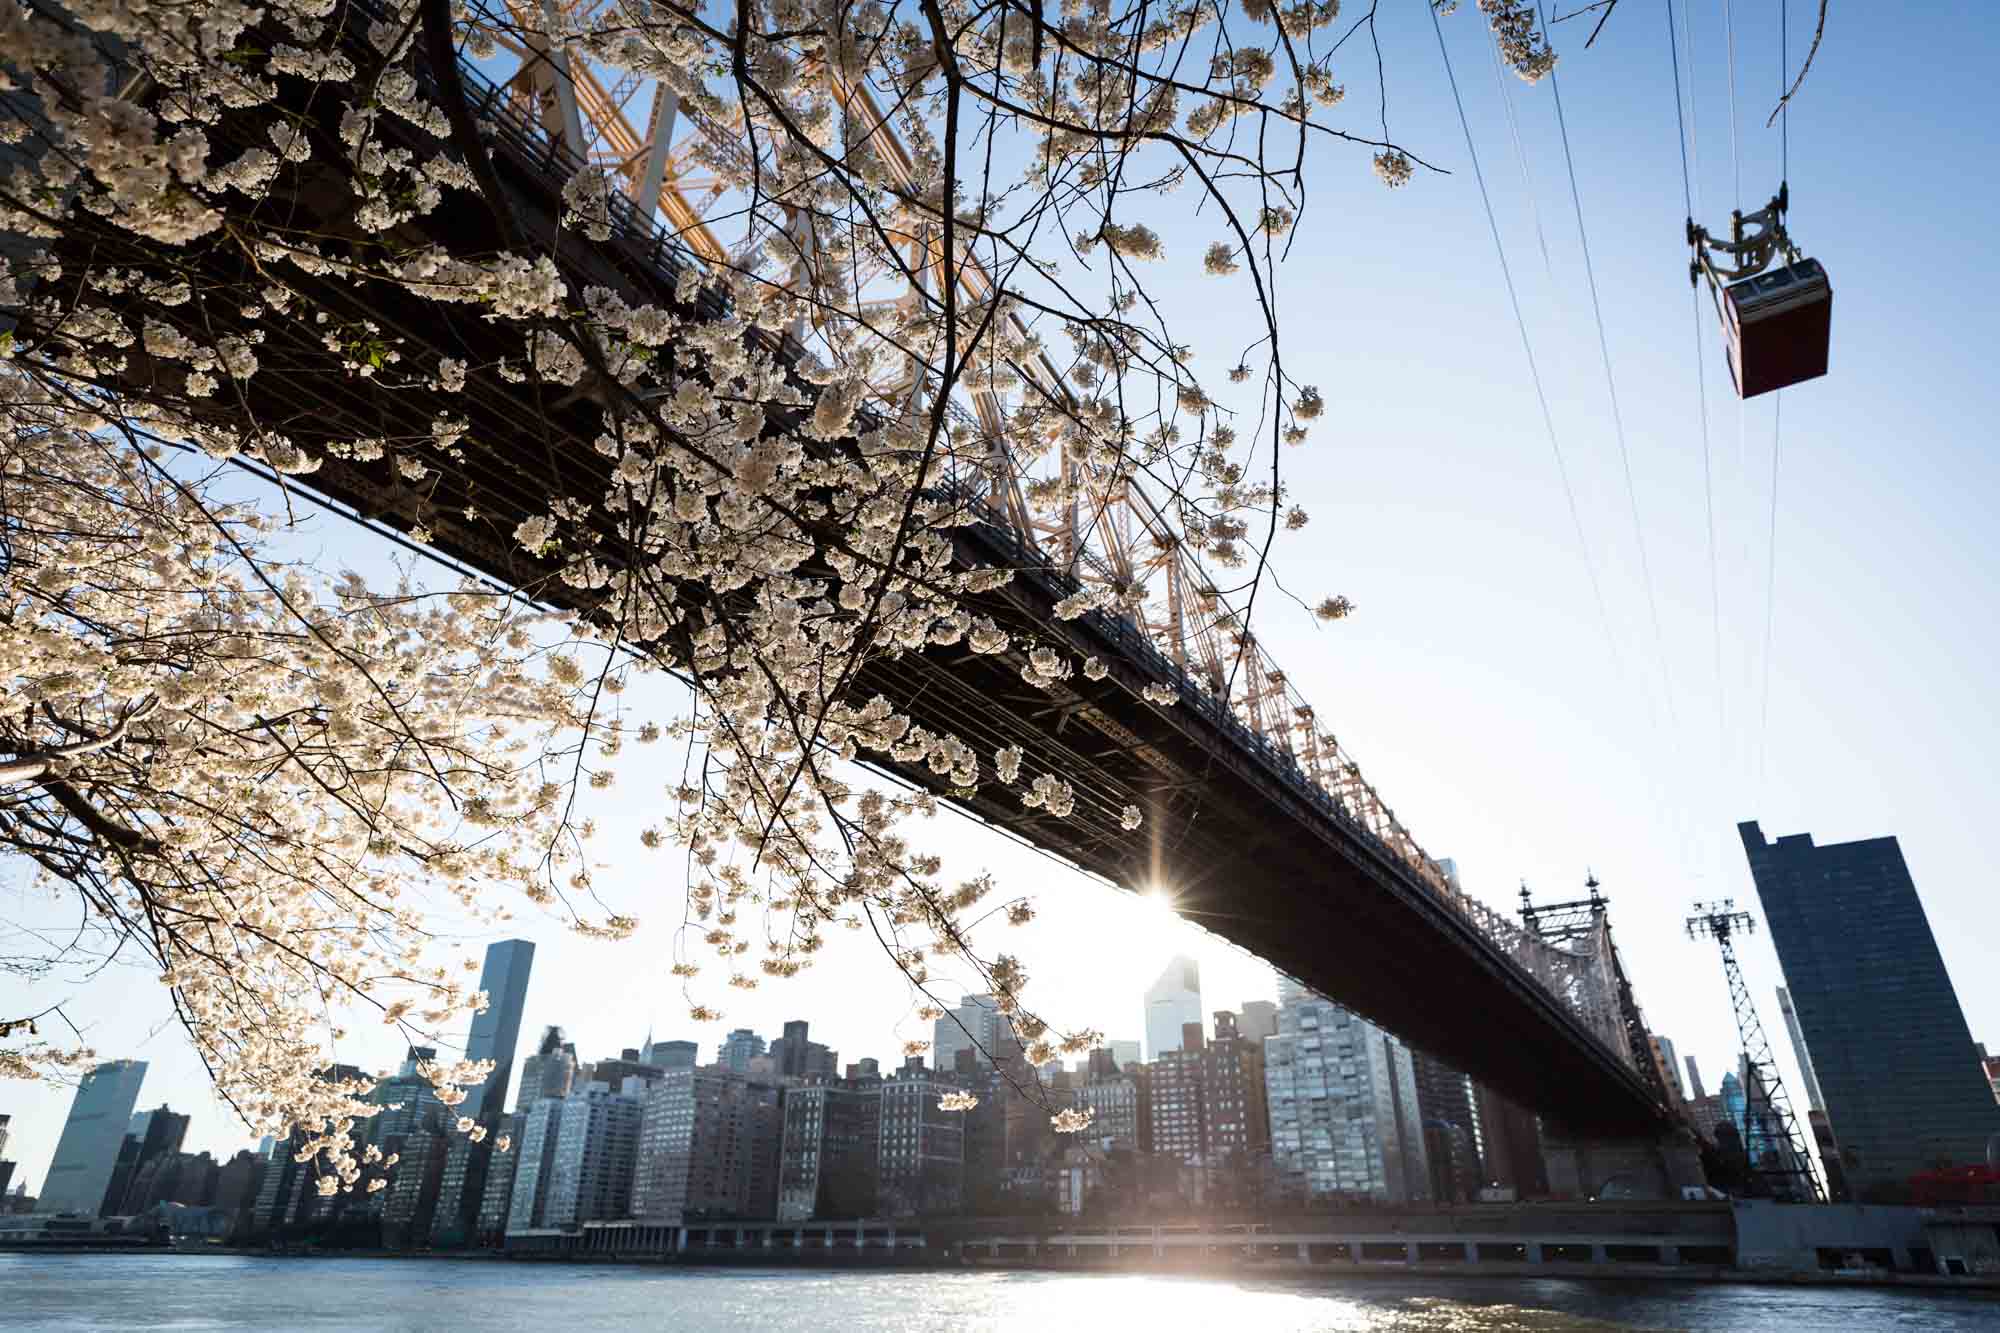 Roosevelt Island cherry blossoms for an article on cherry blossom photo tips